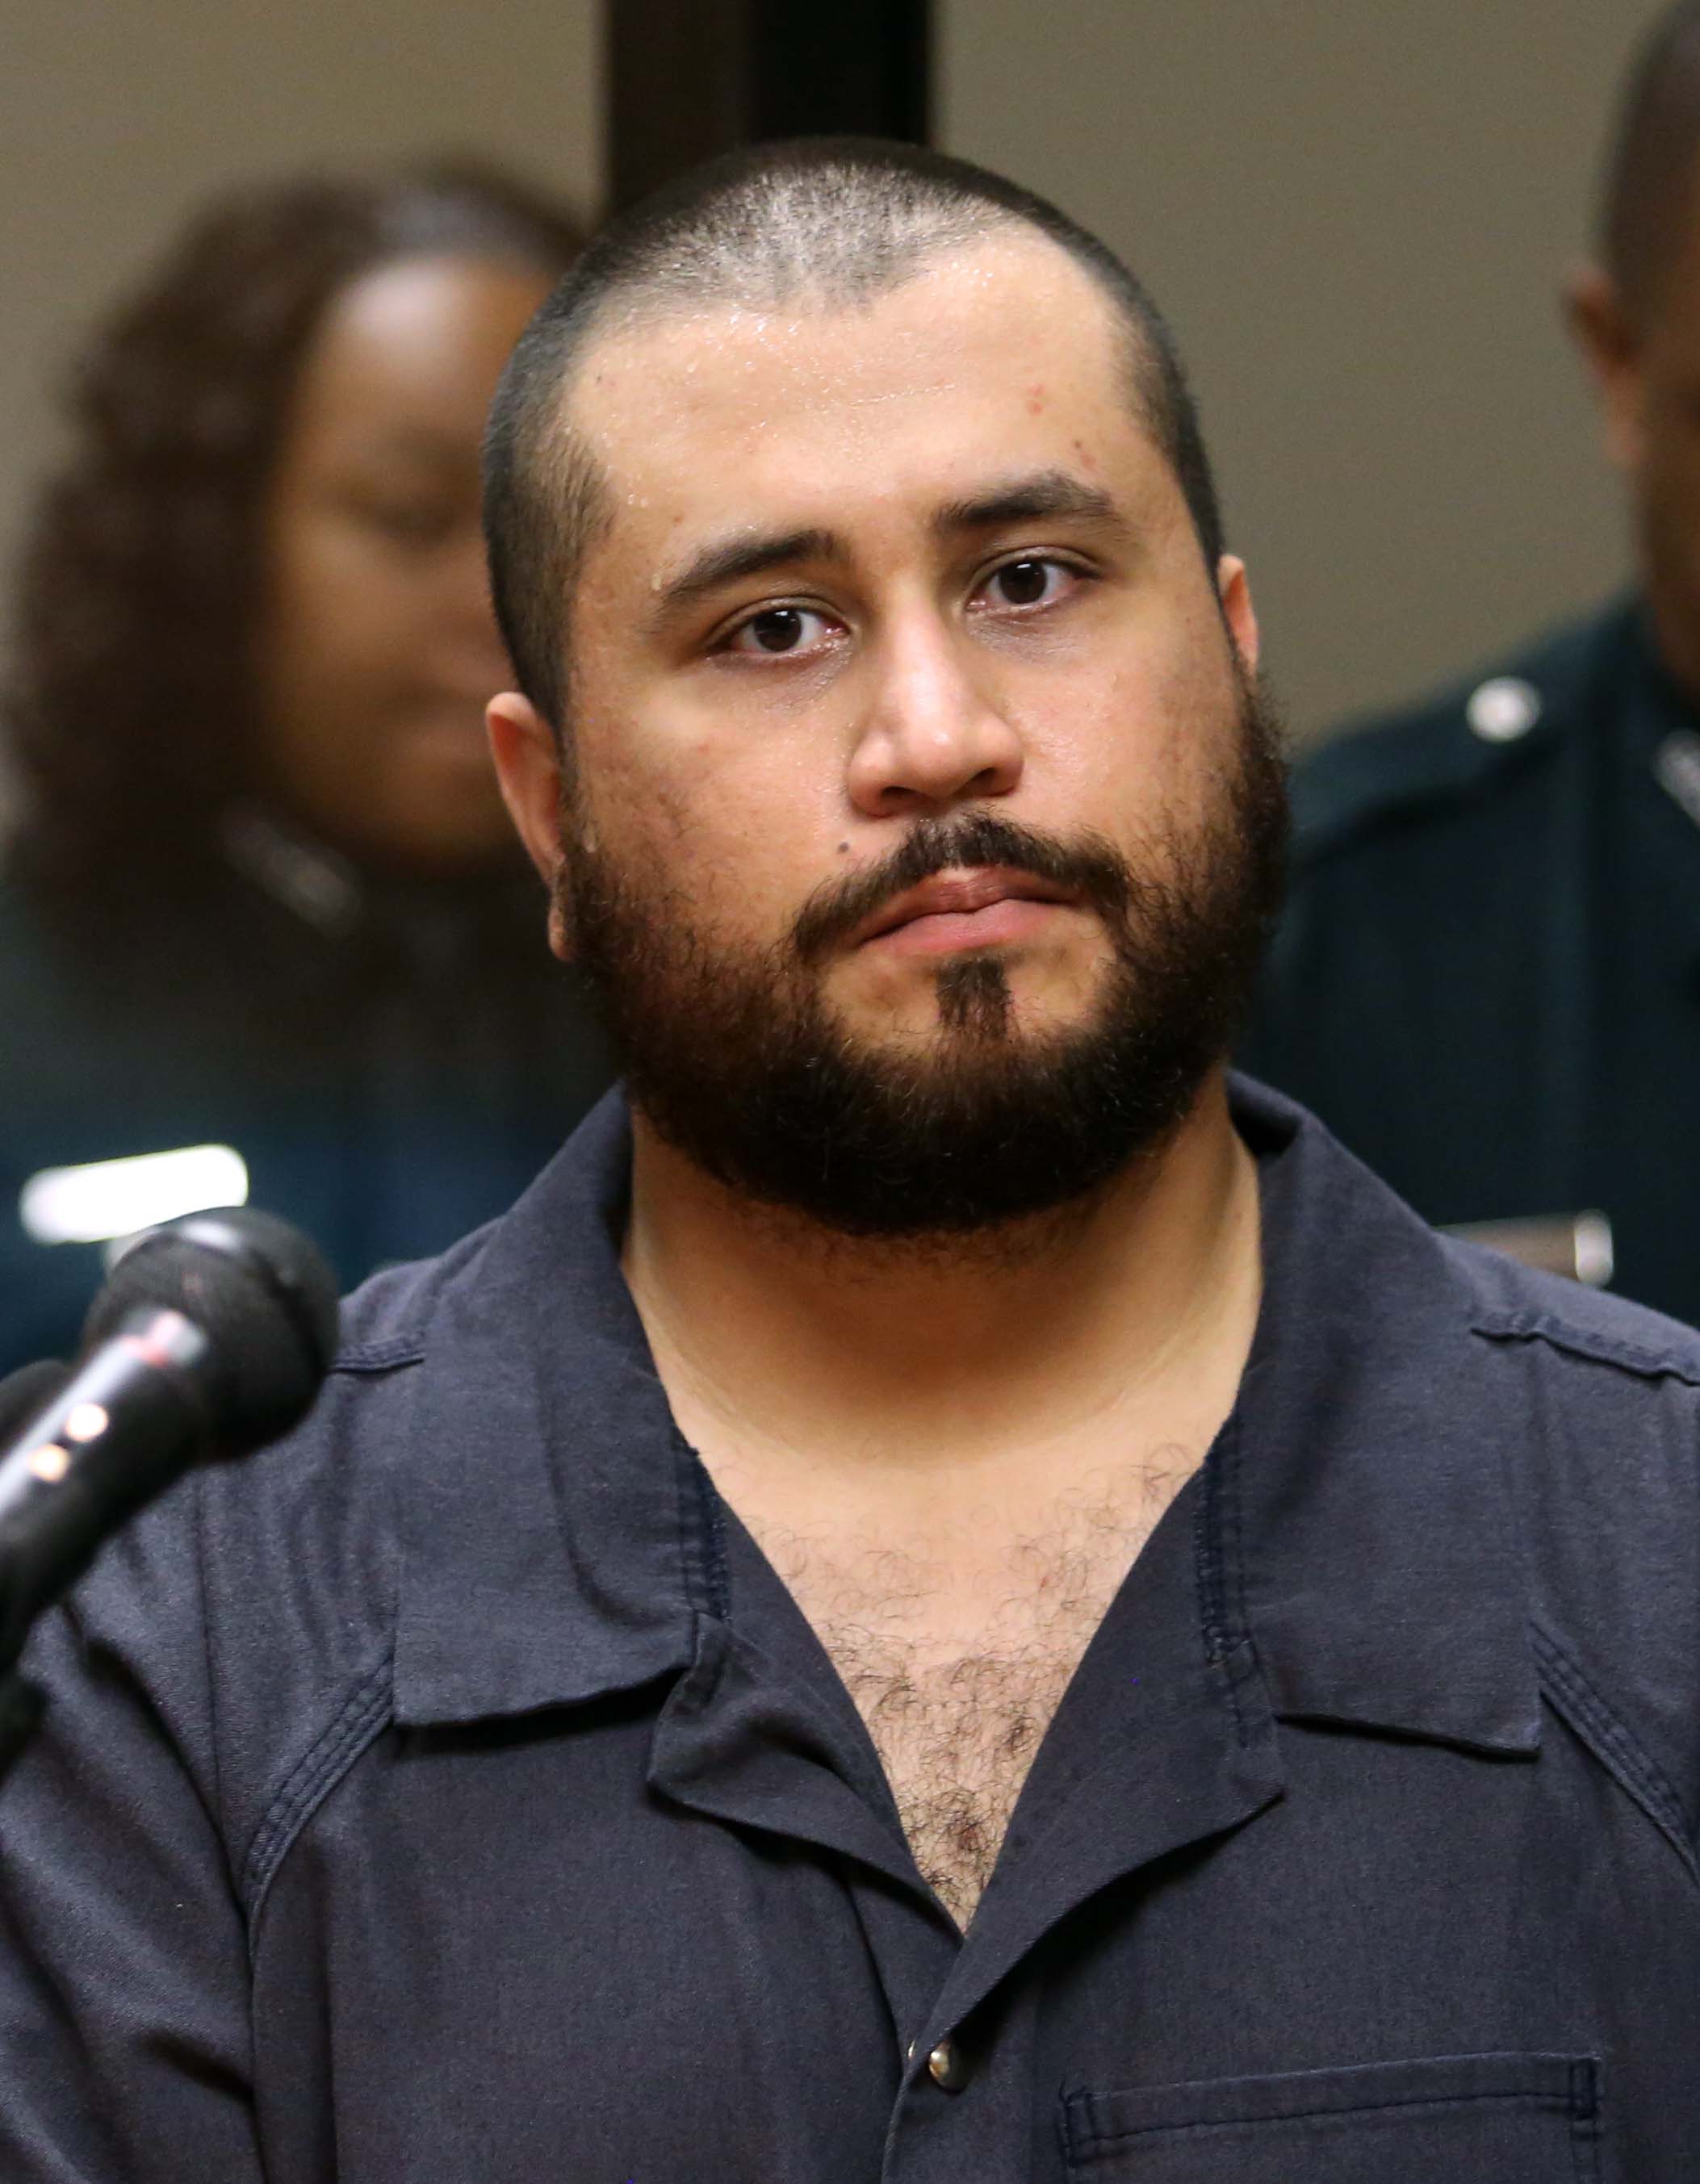 George Zimmerman, the acquitted shooter in the death of Trayvon Martin, faces a Seminole circuit judge during a first-appearance hearing on charges including aggravated assault stemming from a fight with his girlfriend, Nov. 19, 2013 in Sanford, Florida. (Getty Images)